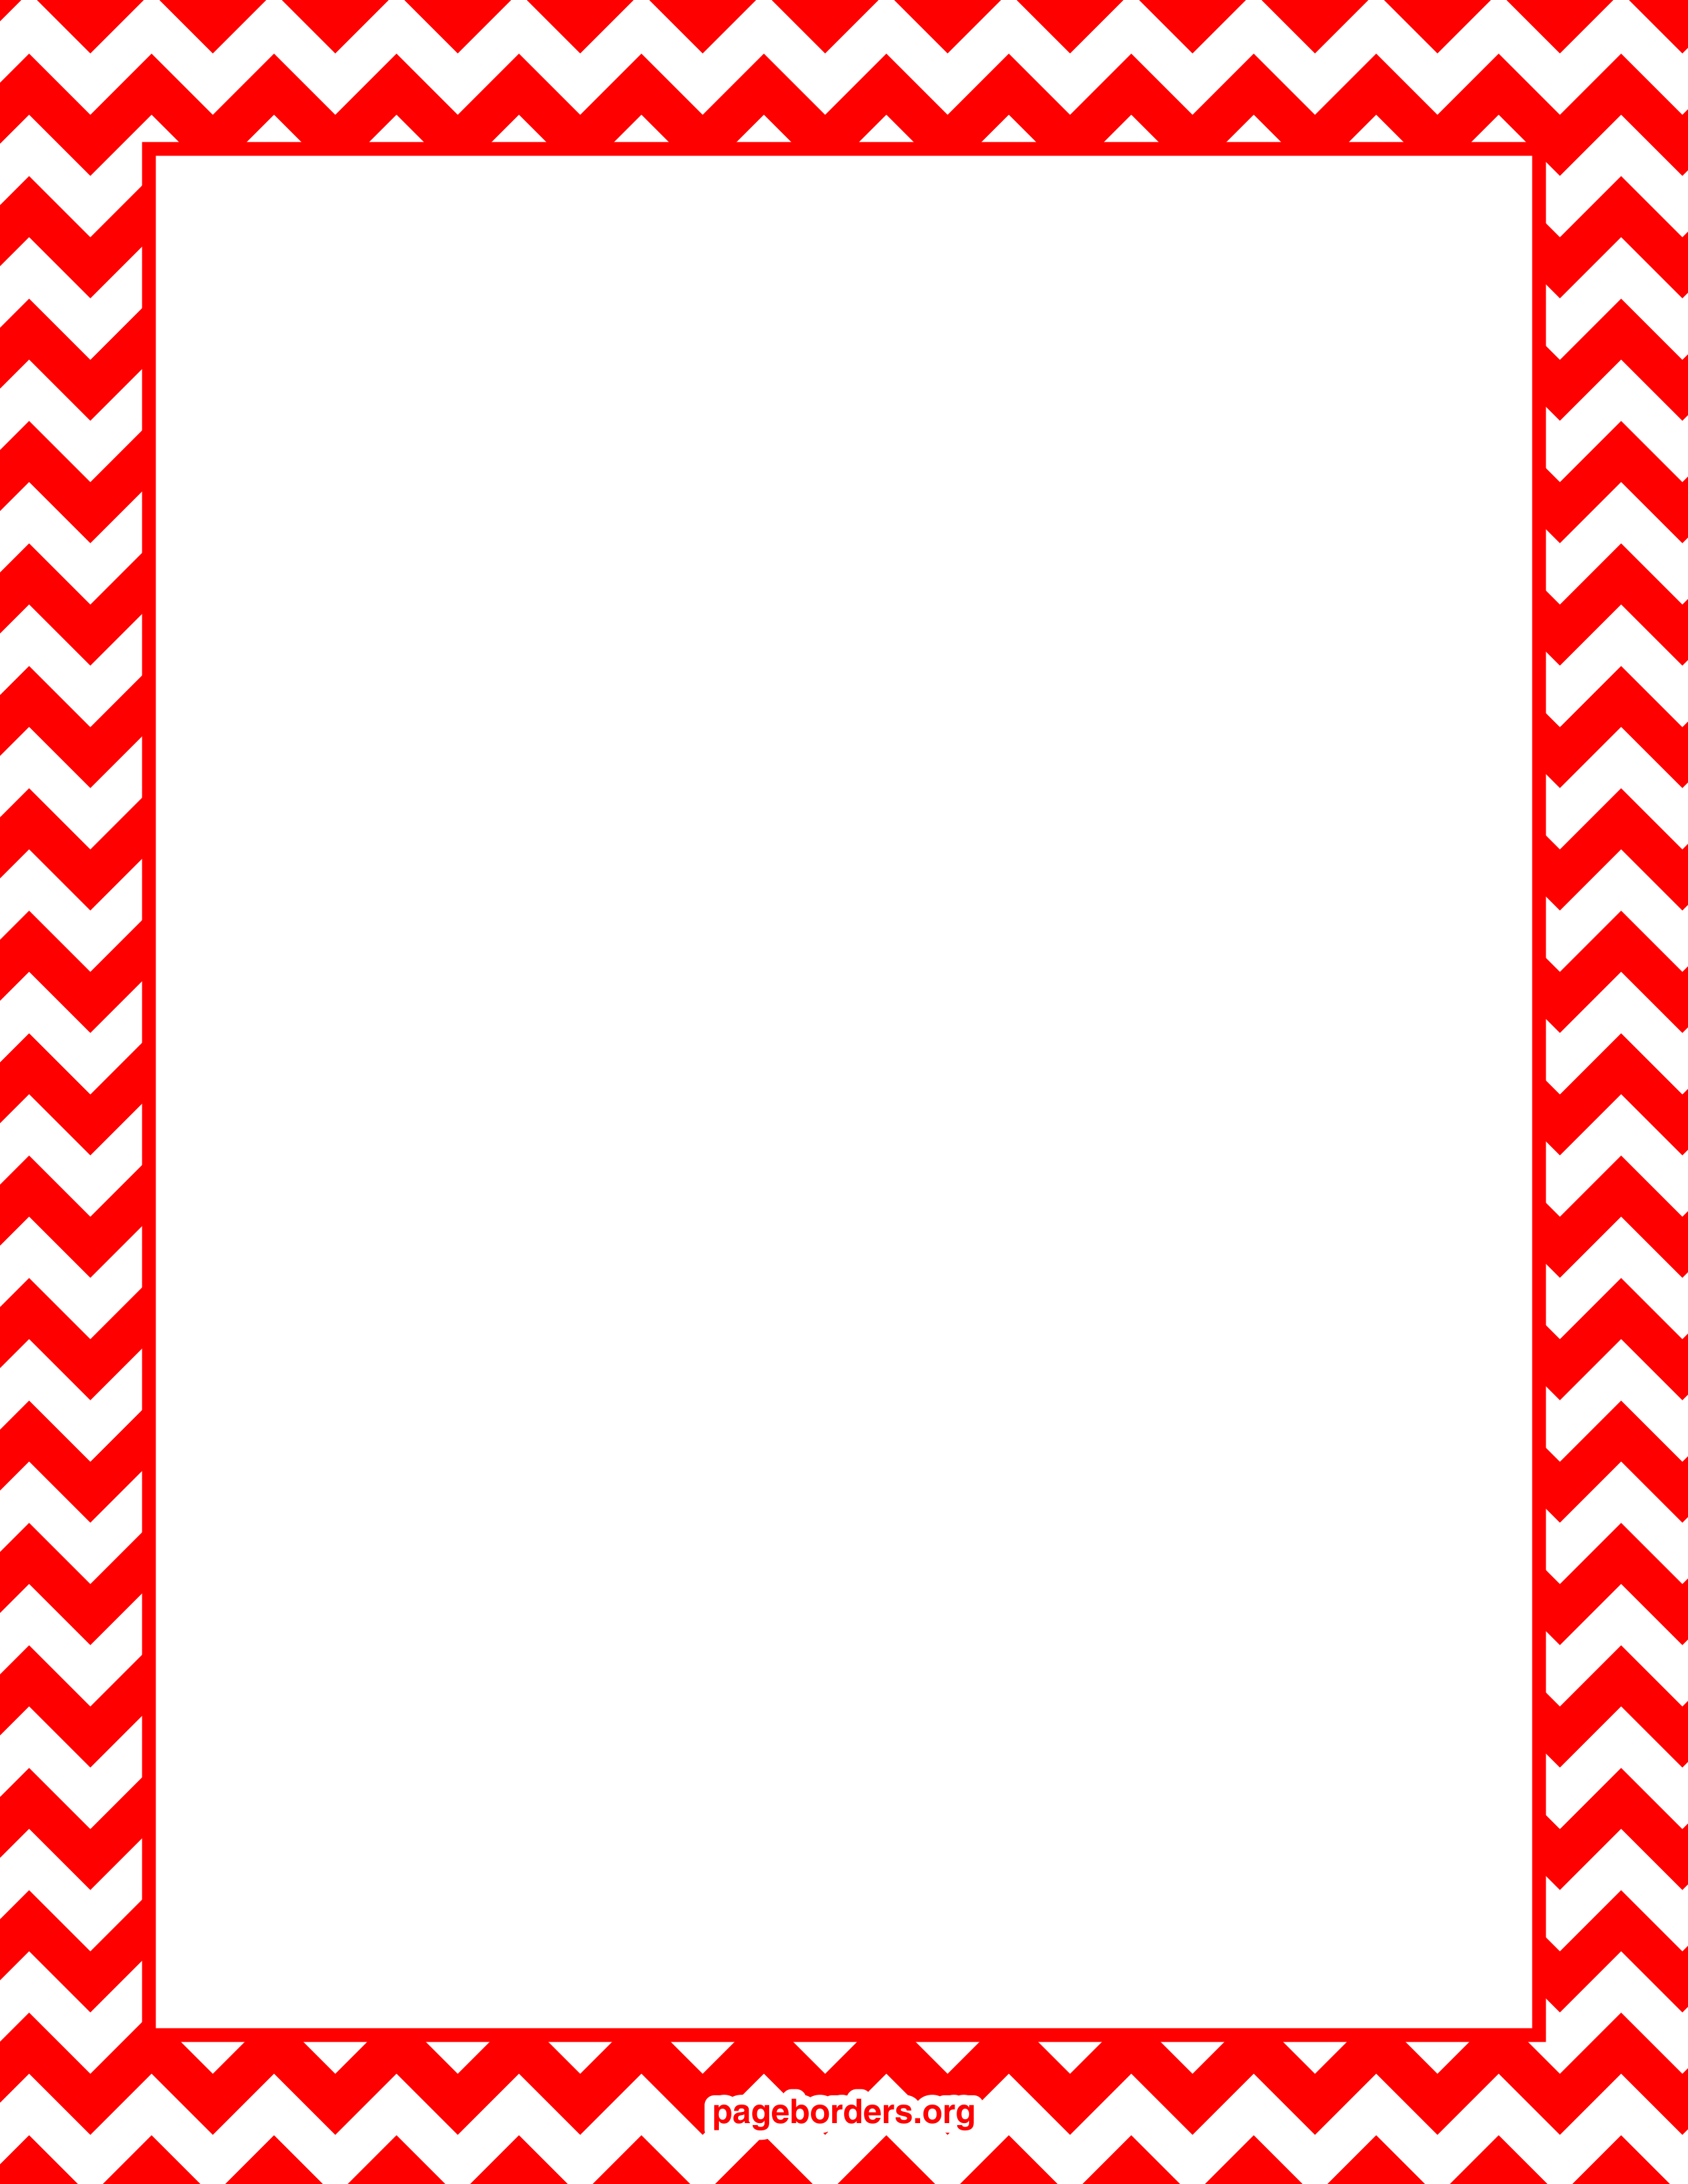 clipart frame red